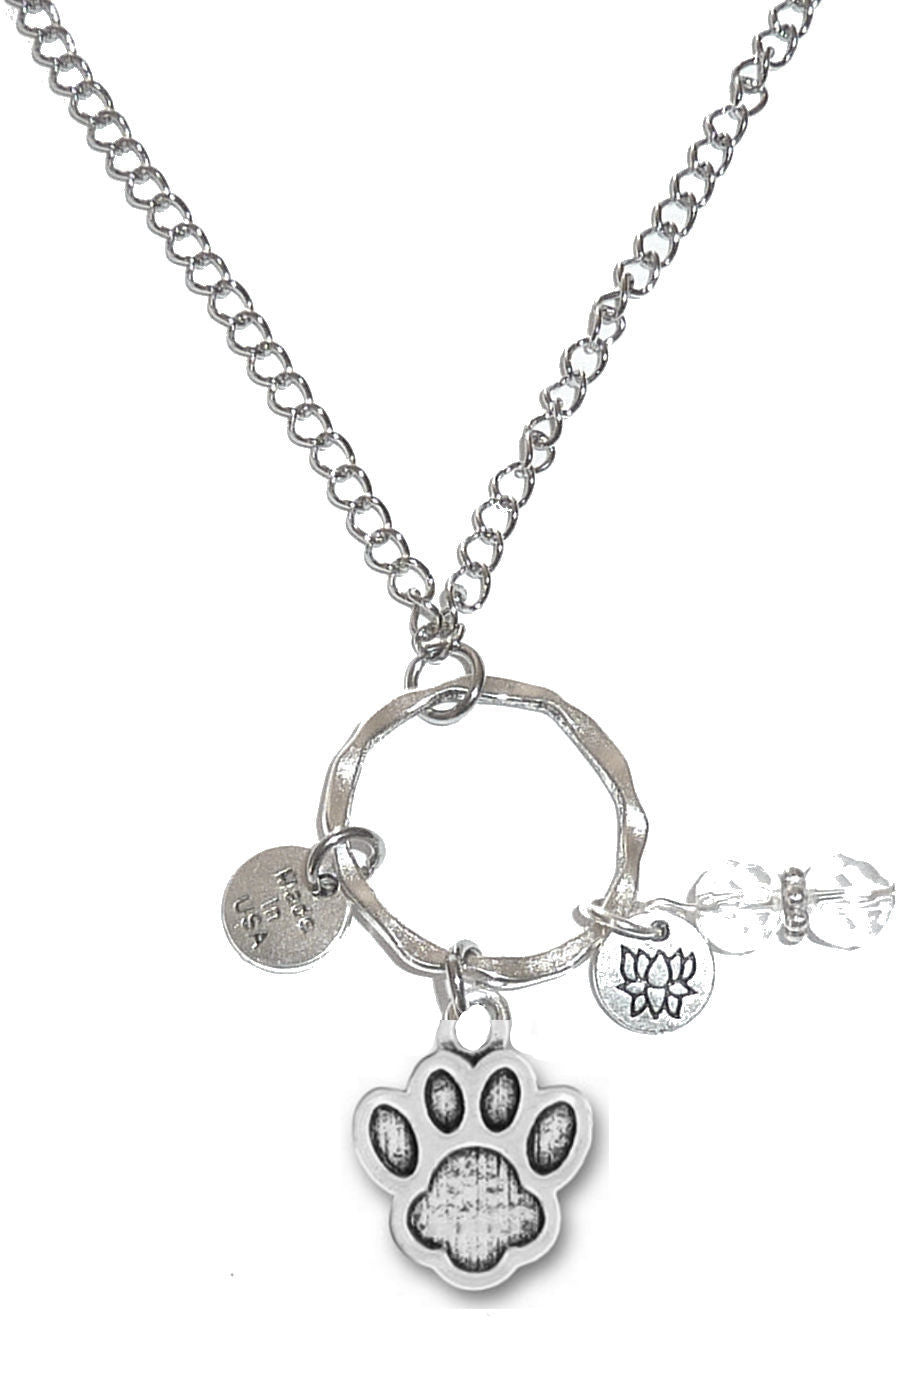 Rearview Mirror Charms - Paw Print Charm